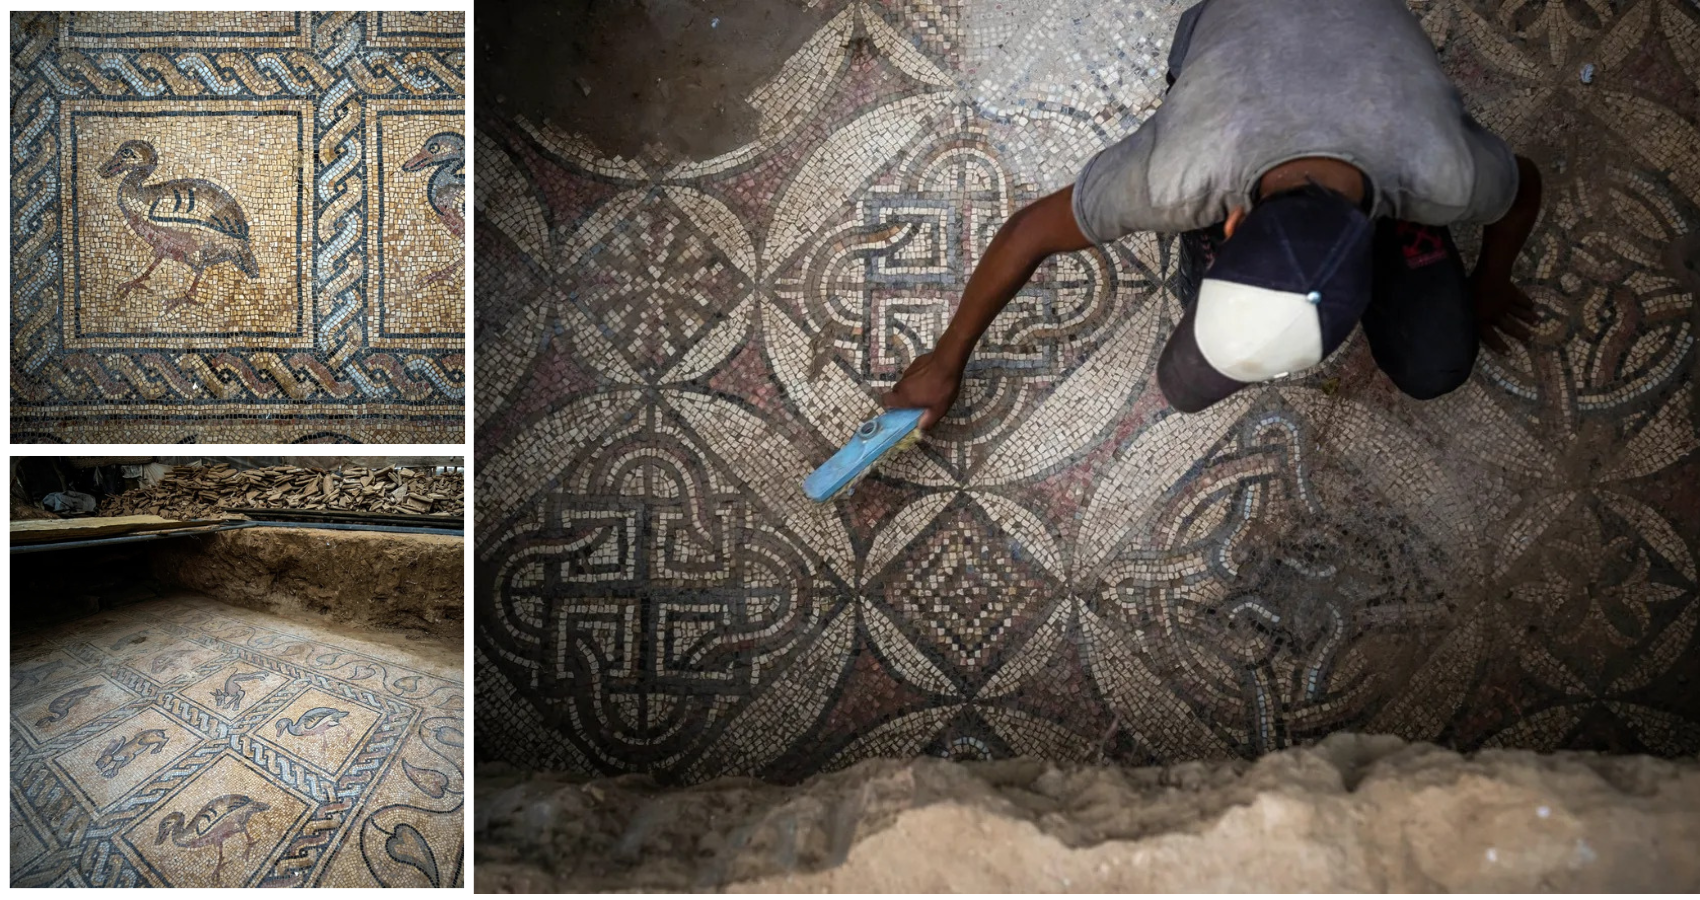 A Palestinian farmer was planting a tree. His shovel hit an ‘exceptional’ ancient mosaic.